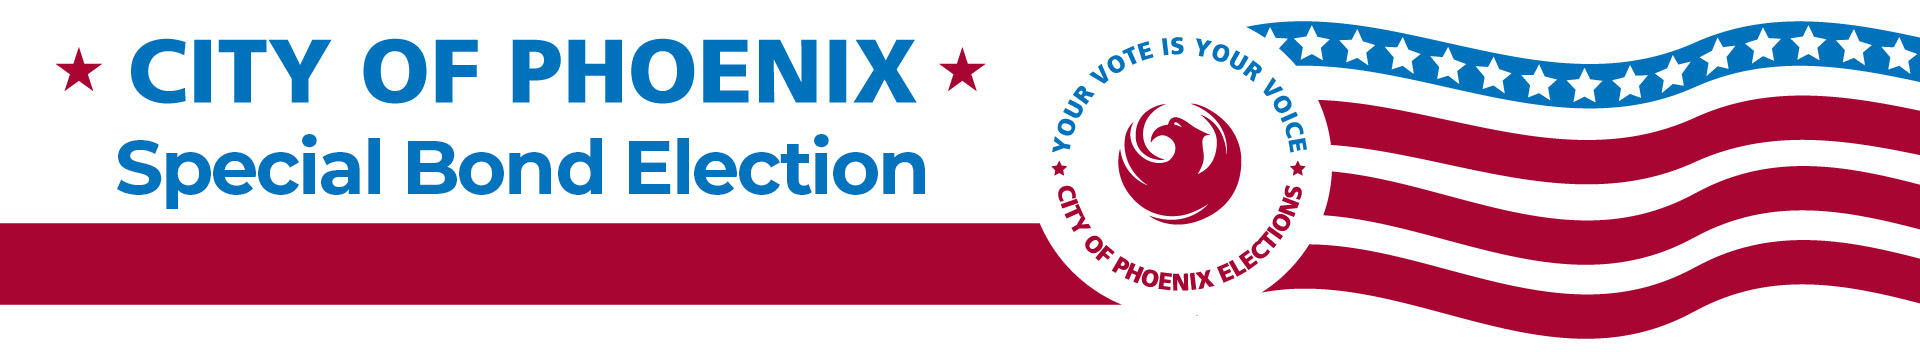 Banner: City of Phoenix official election results